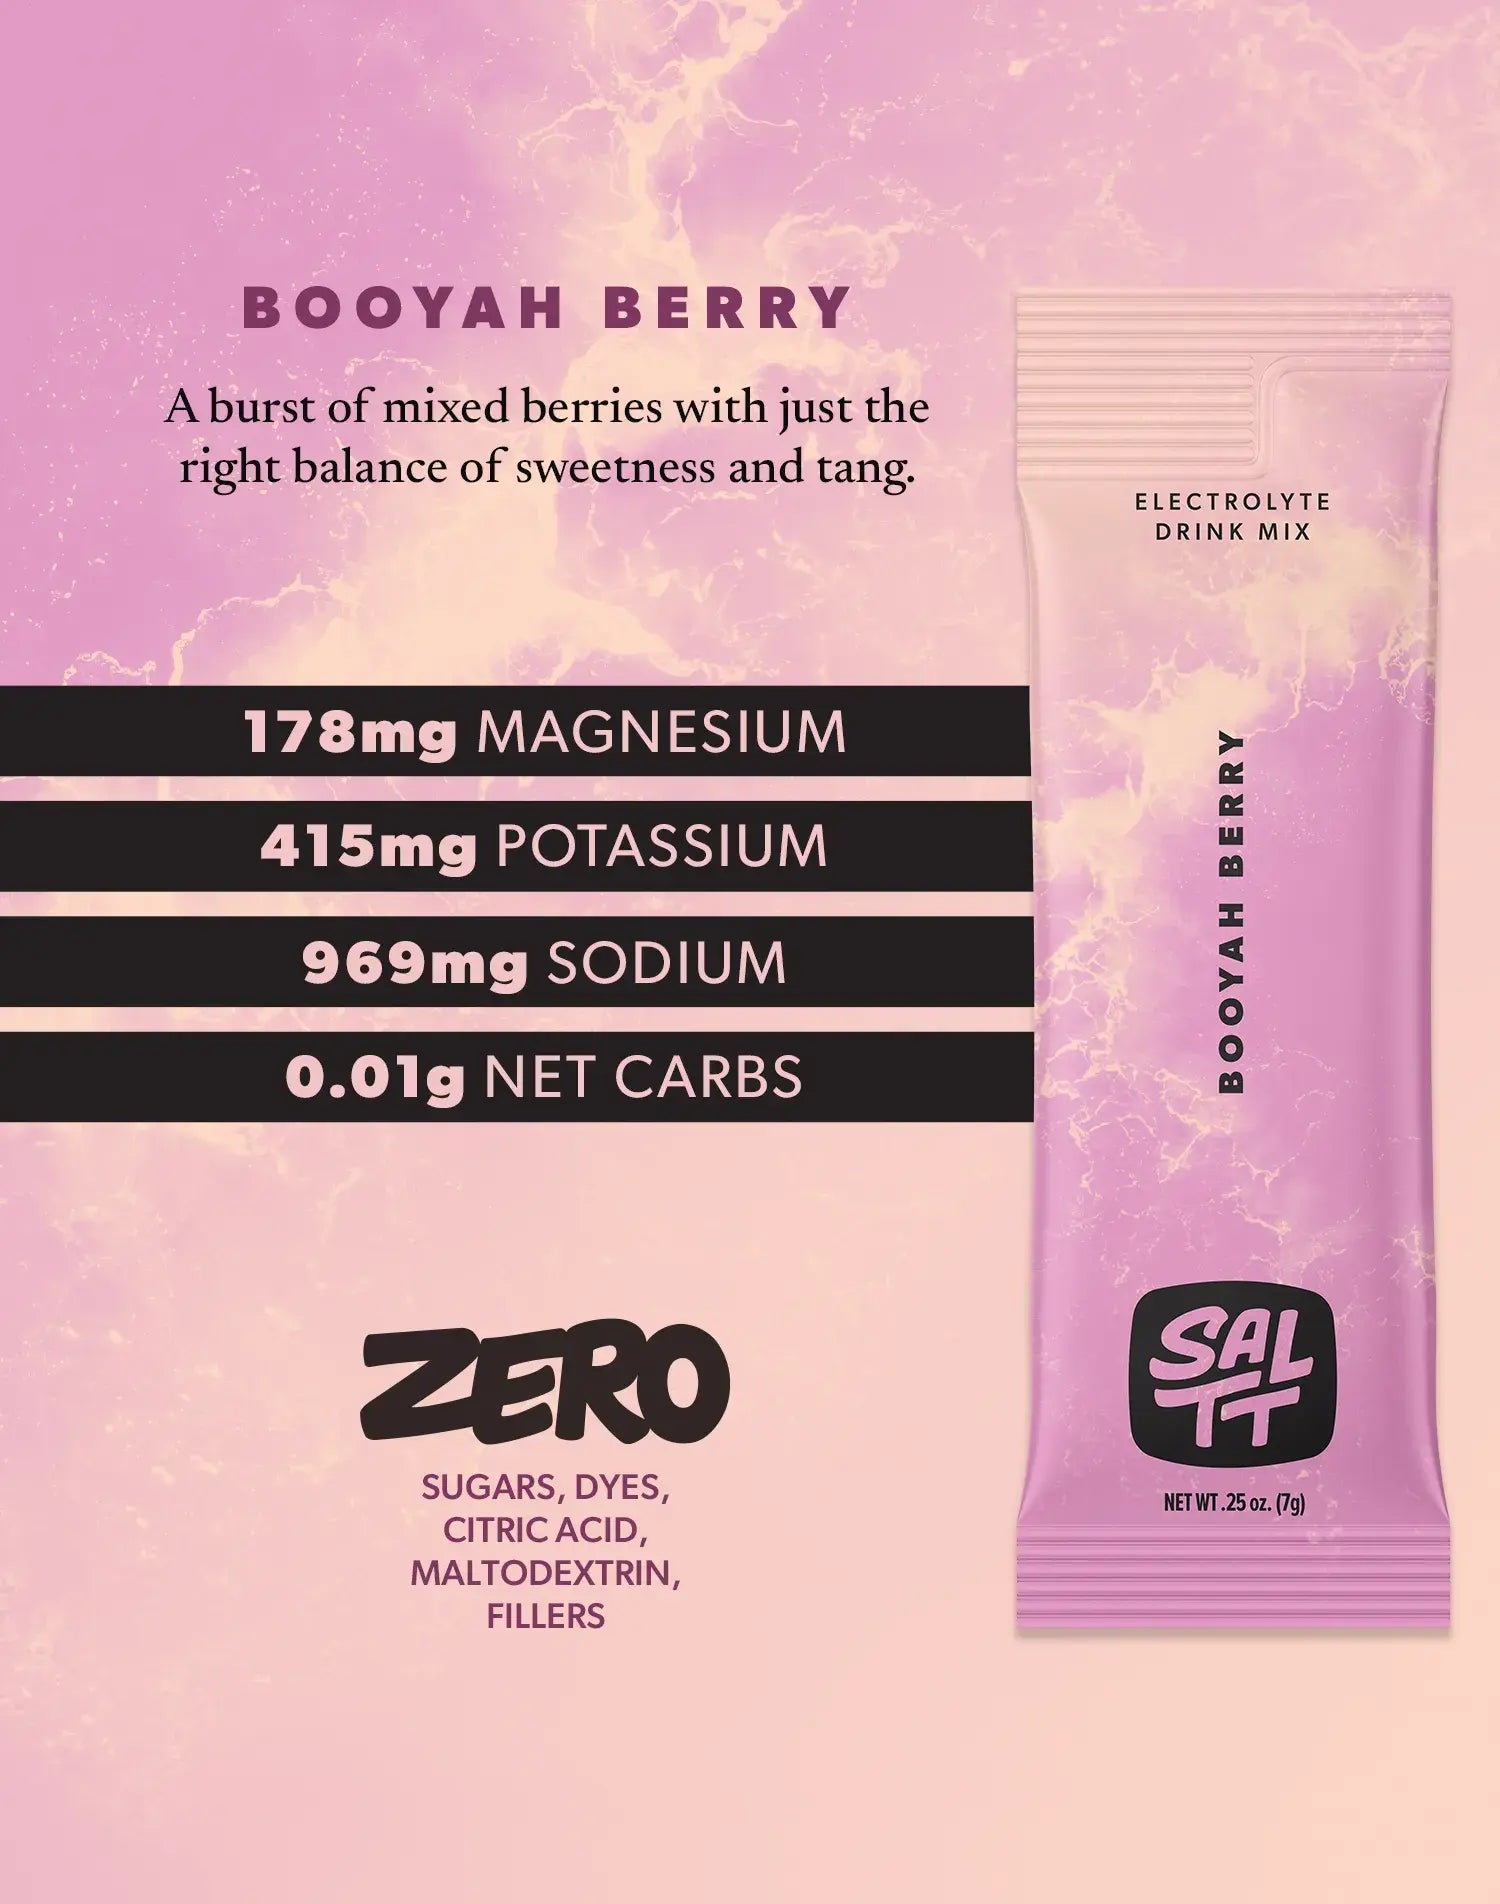 Nutrition for Booyah Berry flavor. Booyah Berry has 178mg Magnesium, 415mg Potassium, 969mg Sodium, 0.01g net carbs. Zero sugars, dyes, citric acid, maltodextrin, or fillers. See nutrition dropdown for complete supplement facts.